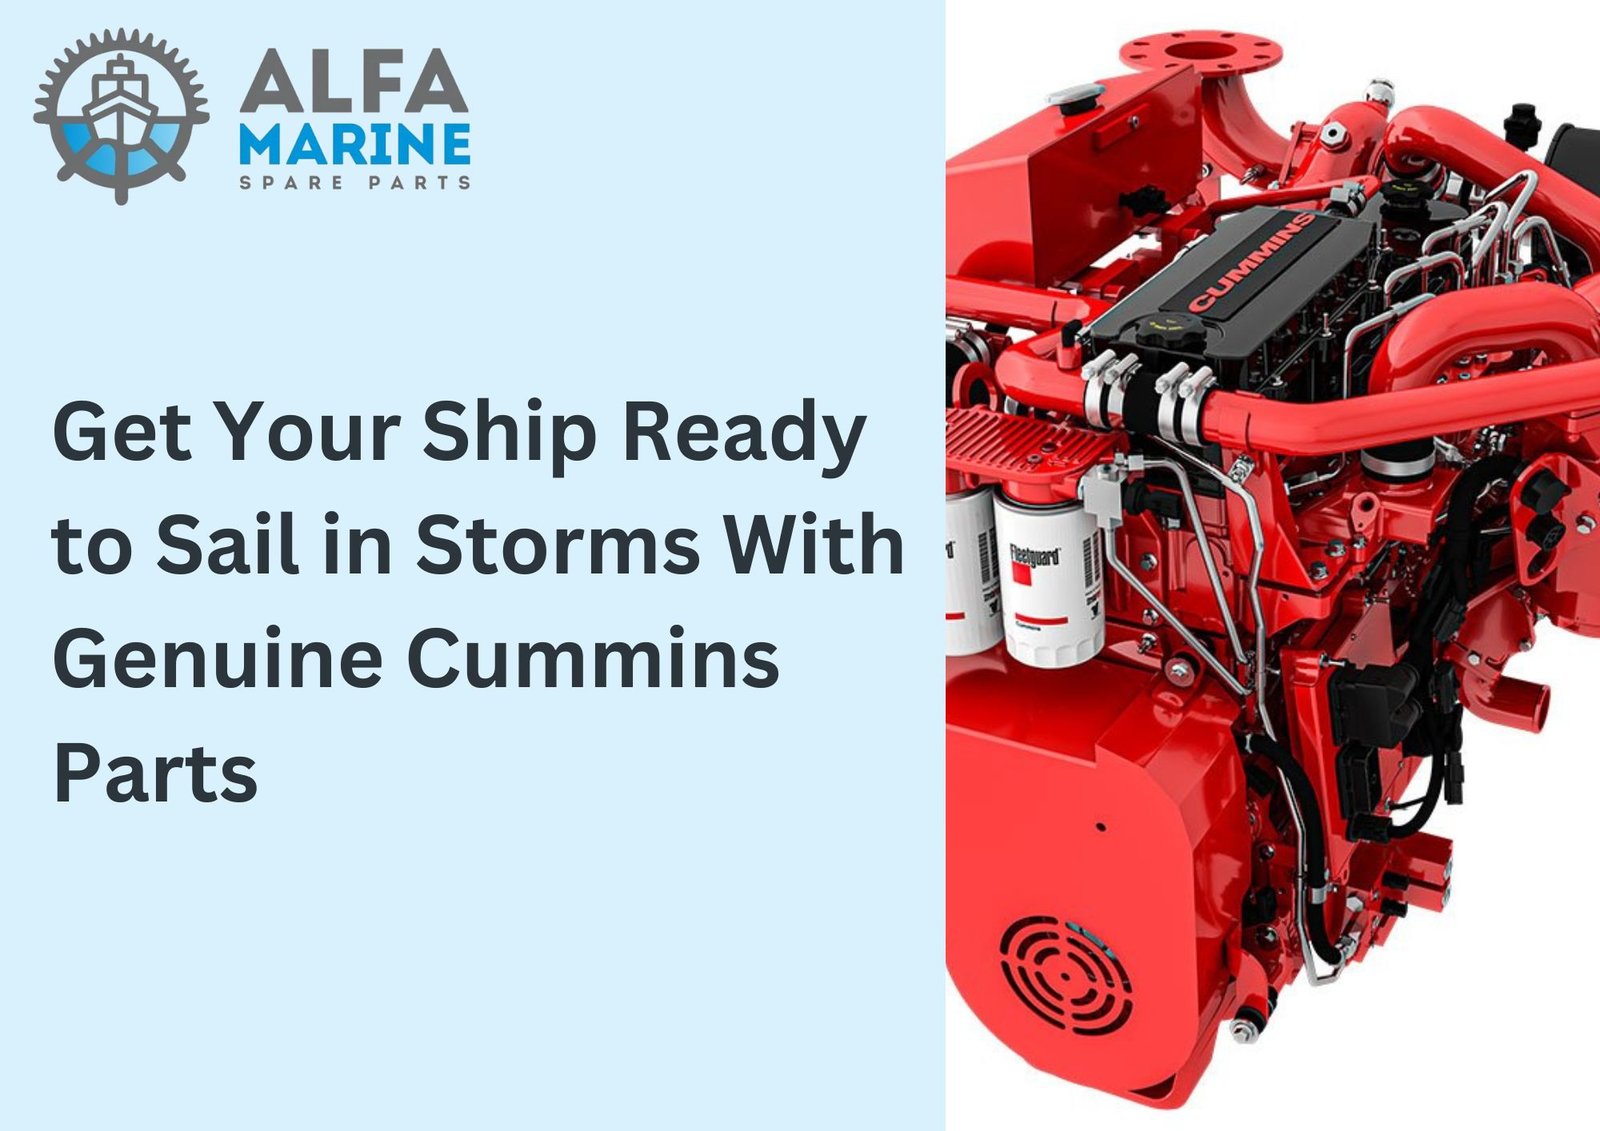 Get Your Ship Ready to Sail in Storms With Cummins Parts